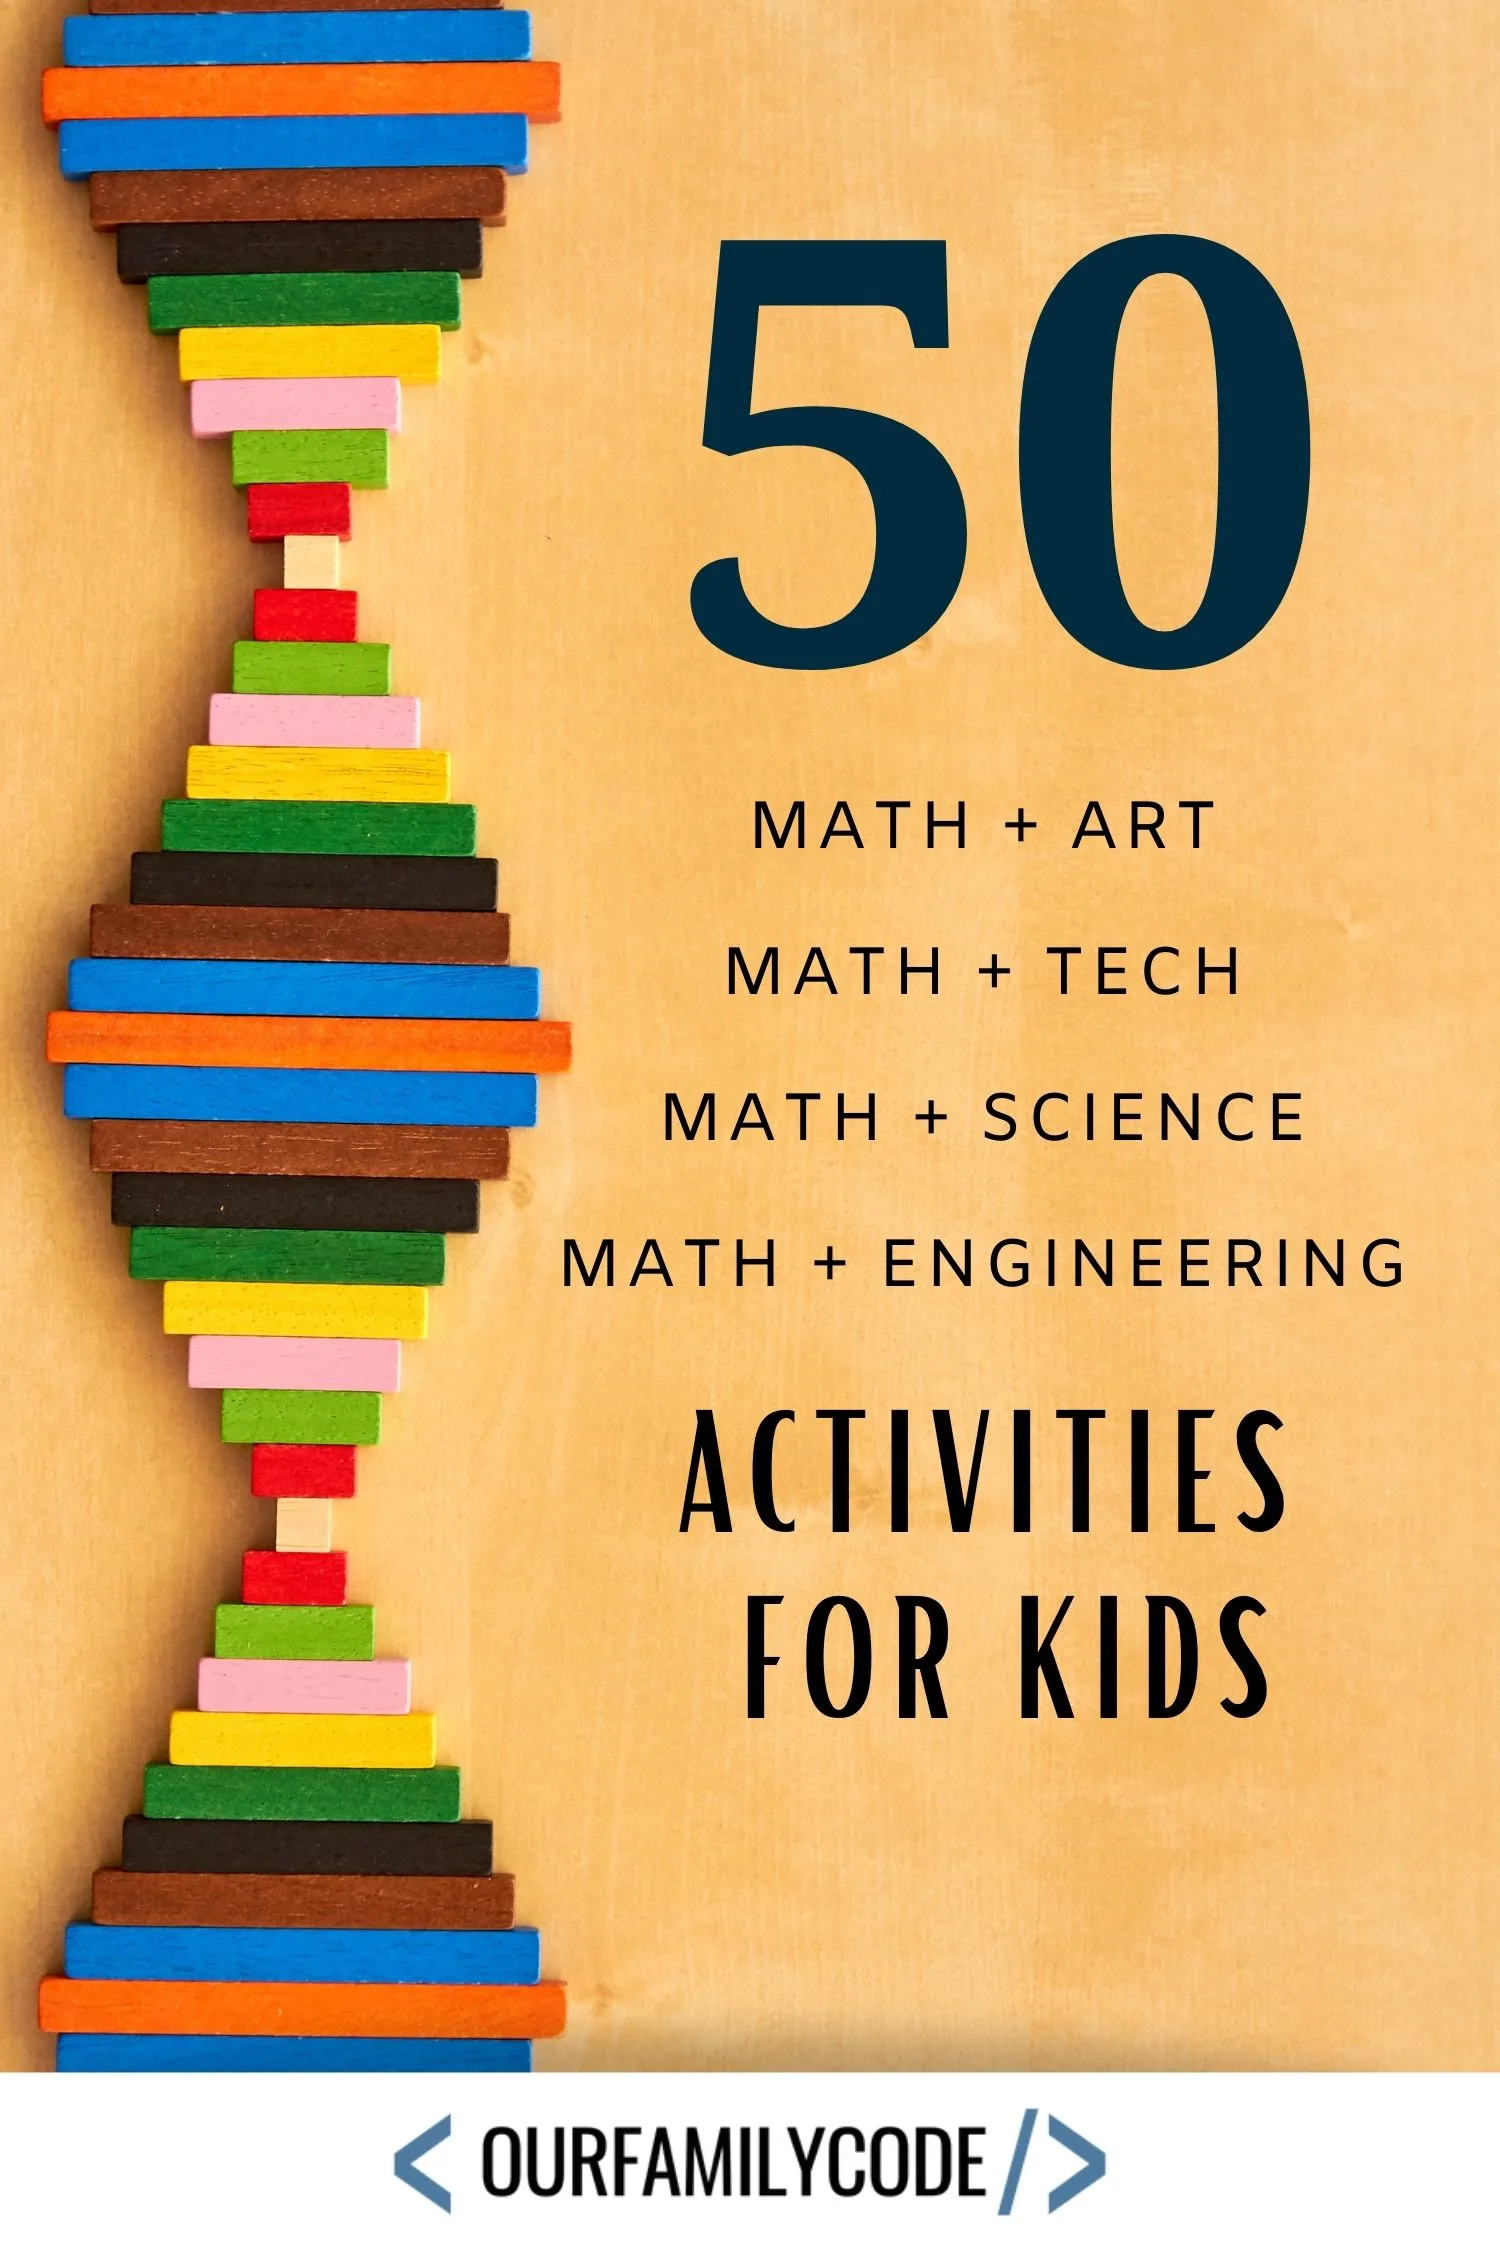 A picture of 50 math activities for kids written in blue text with colored math bars along side and a tan background.